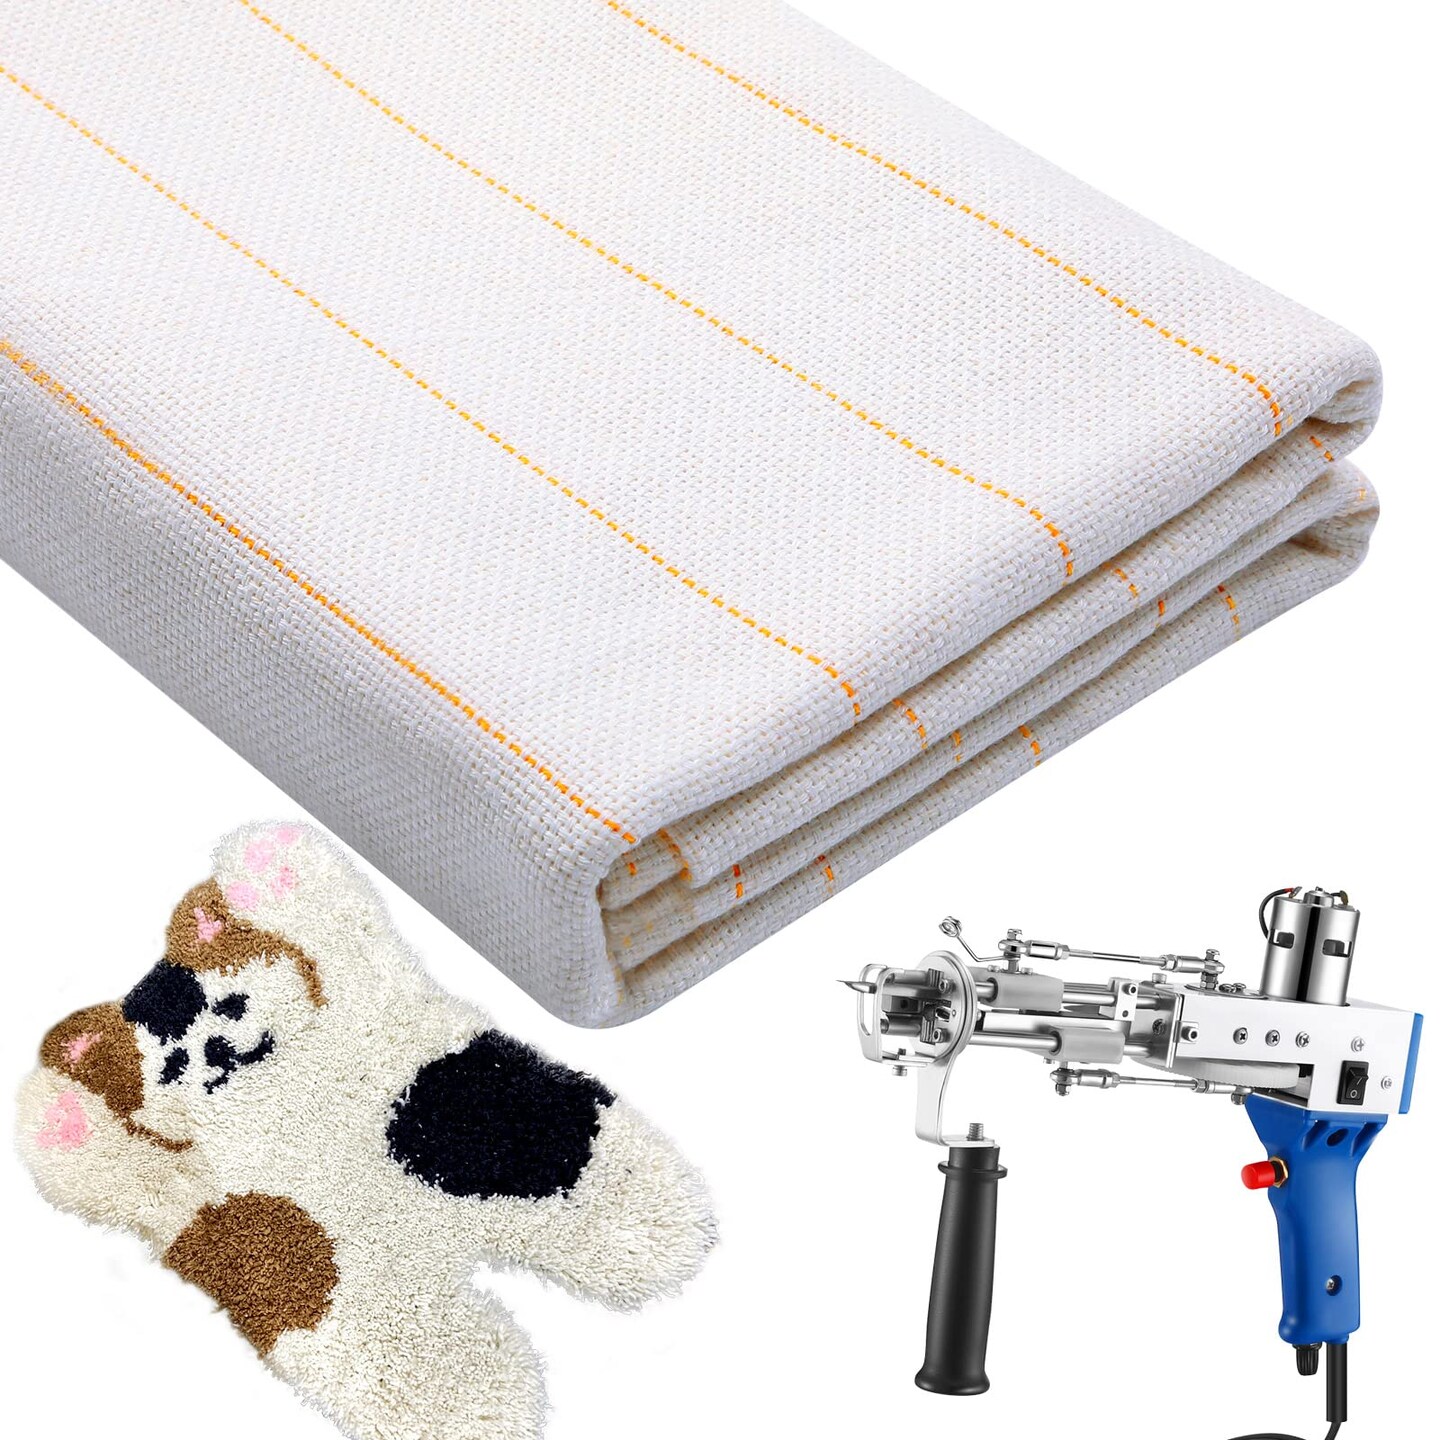 Tudomro Primary Tufting Cloth with Marked Lines Large Size Tufting Cloth DIY Handmade Rug Fabric Needlework Rug Making Supplies Rug Backing Fabric for Tufting Gun Rug Punch Needle 57.6 x 39.6&#x27;&#x27;